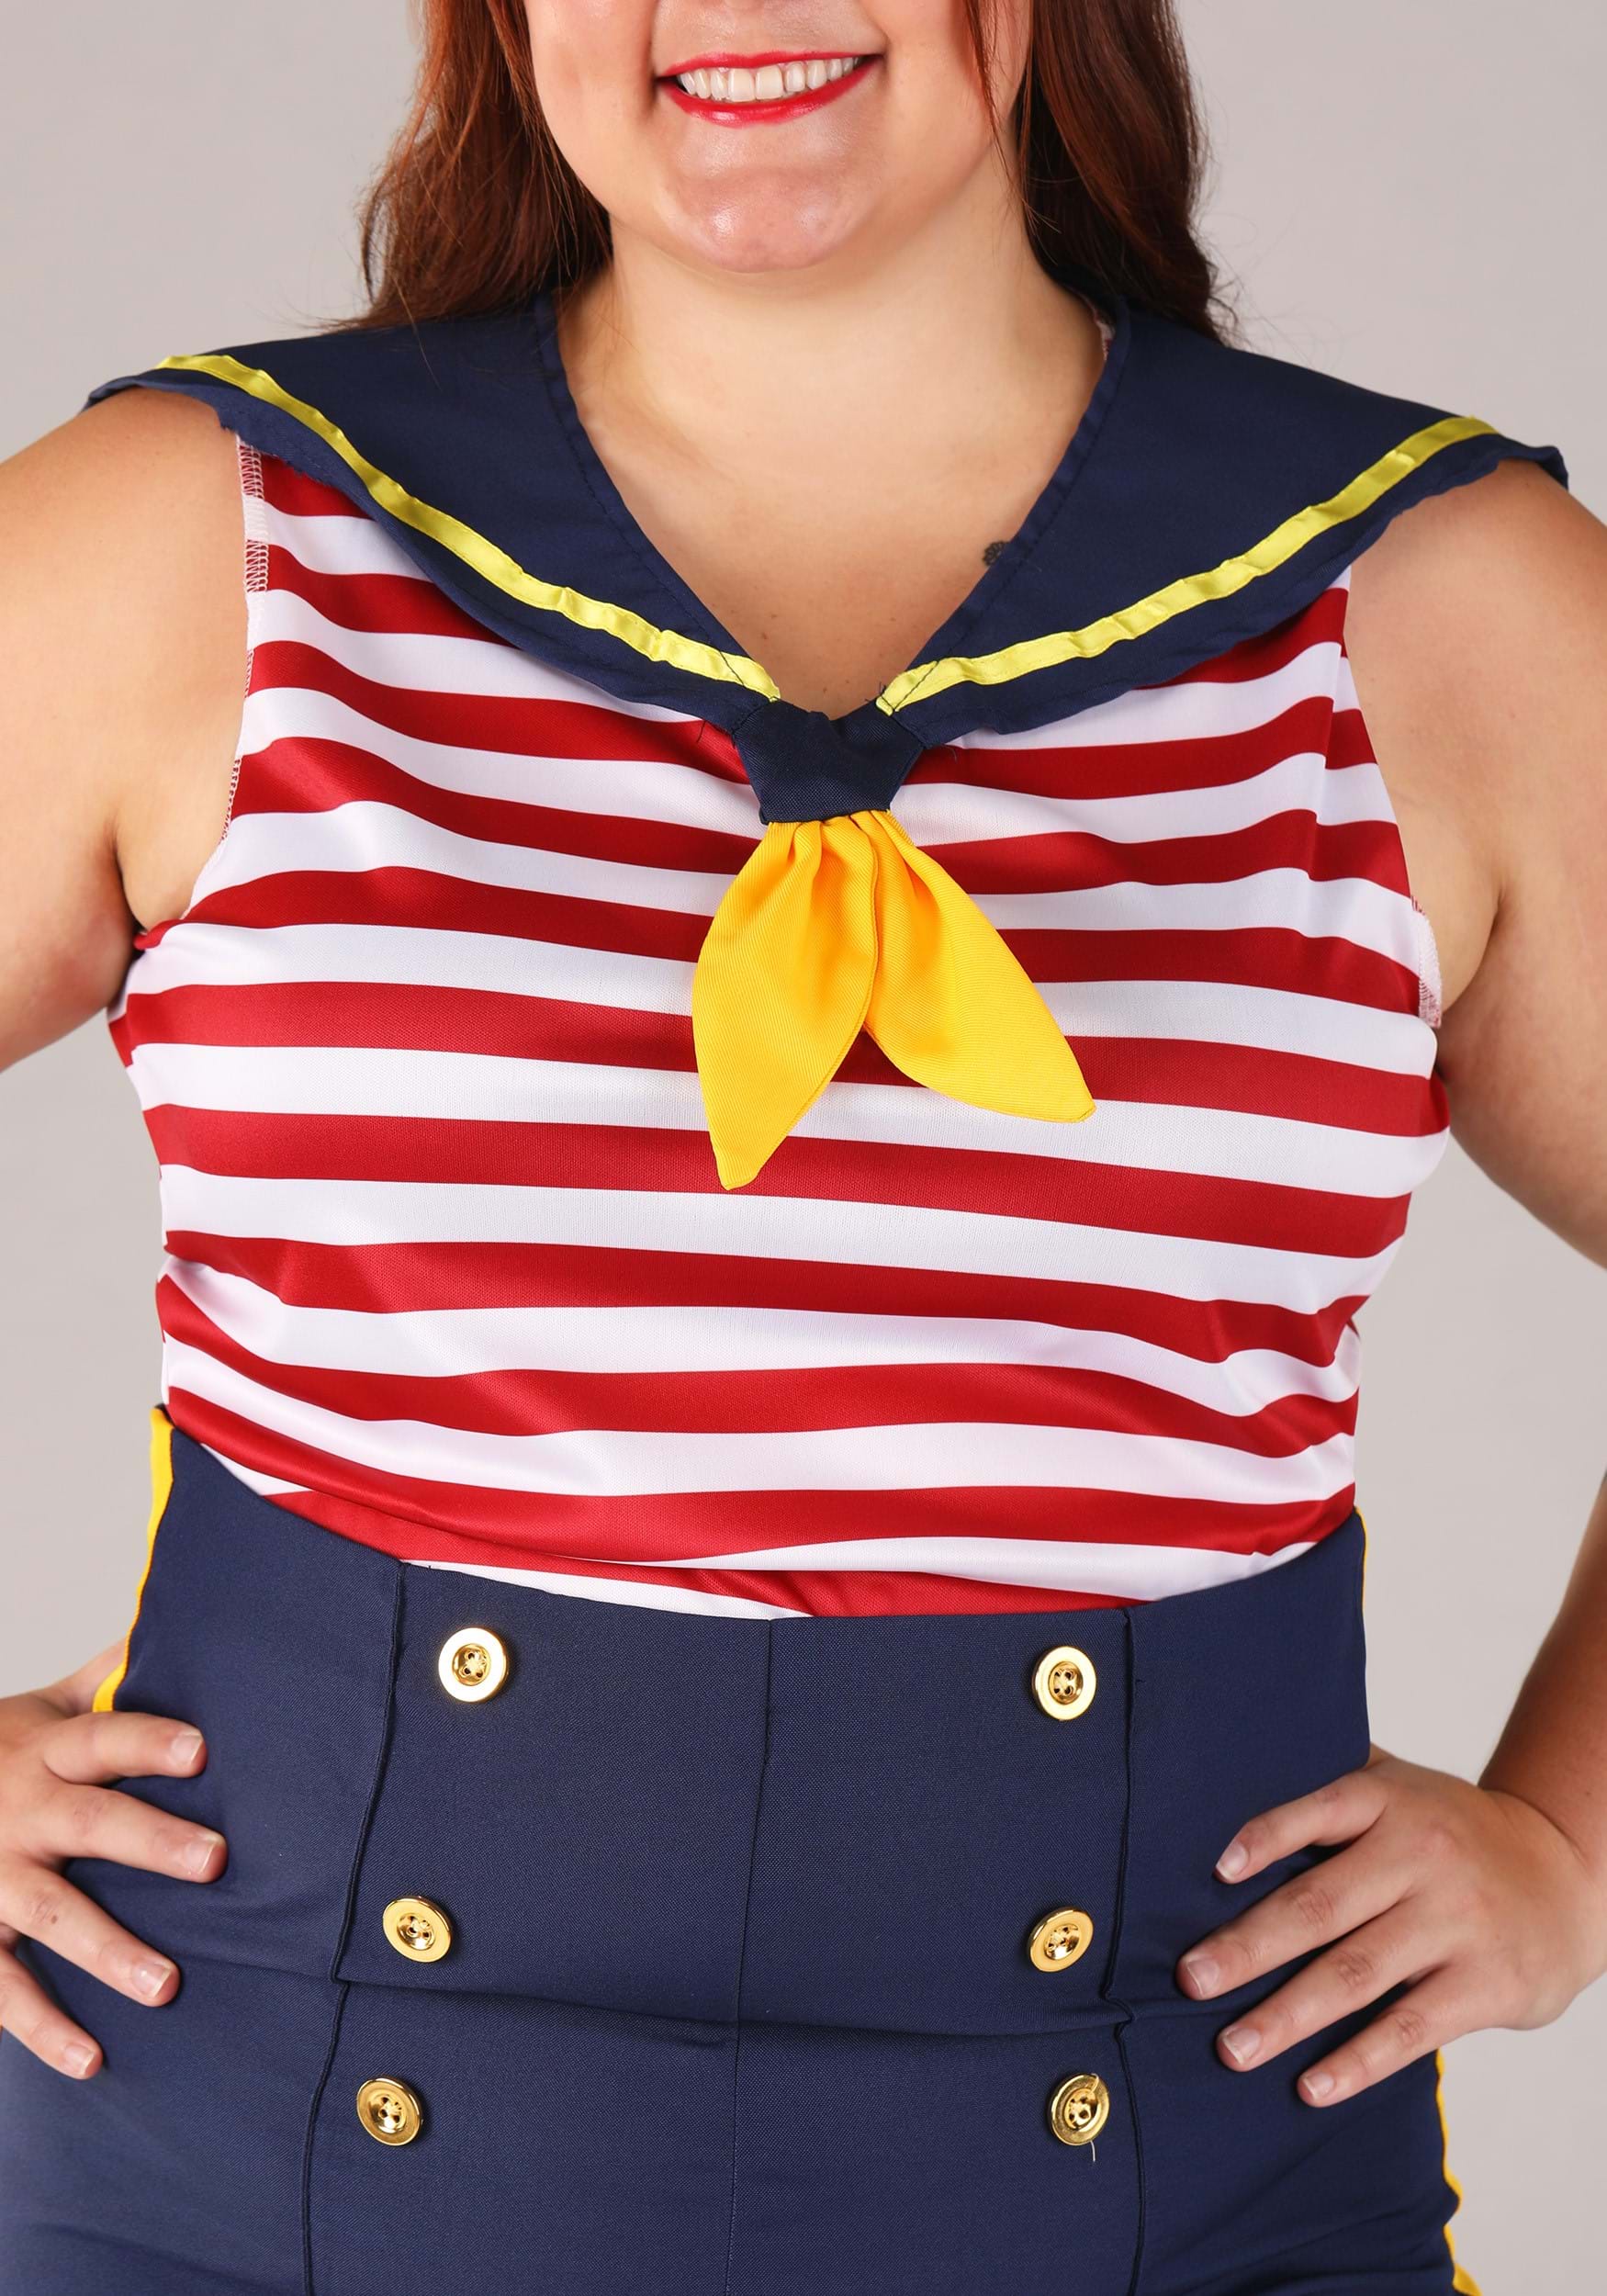 Perfect Pin Up Sailor Costume For Plus Size Women 1X 2X